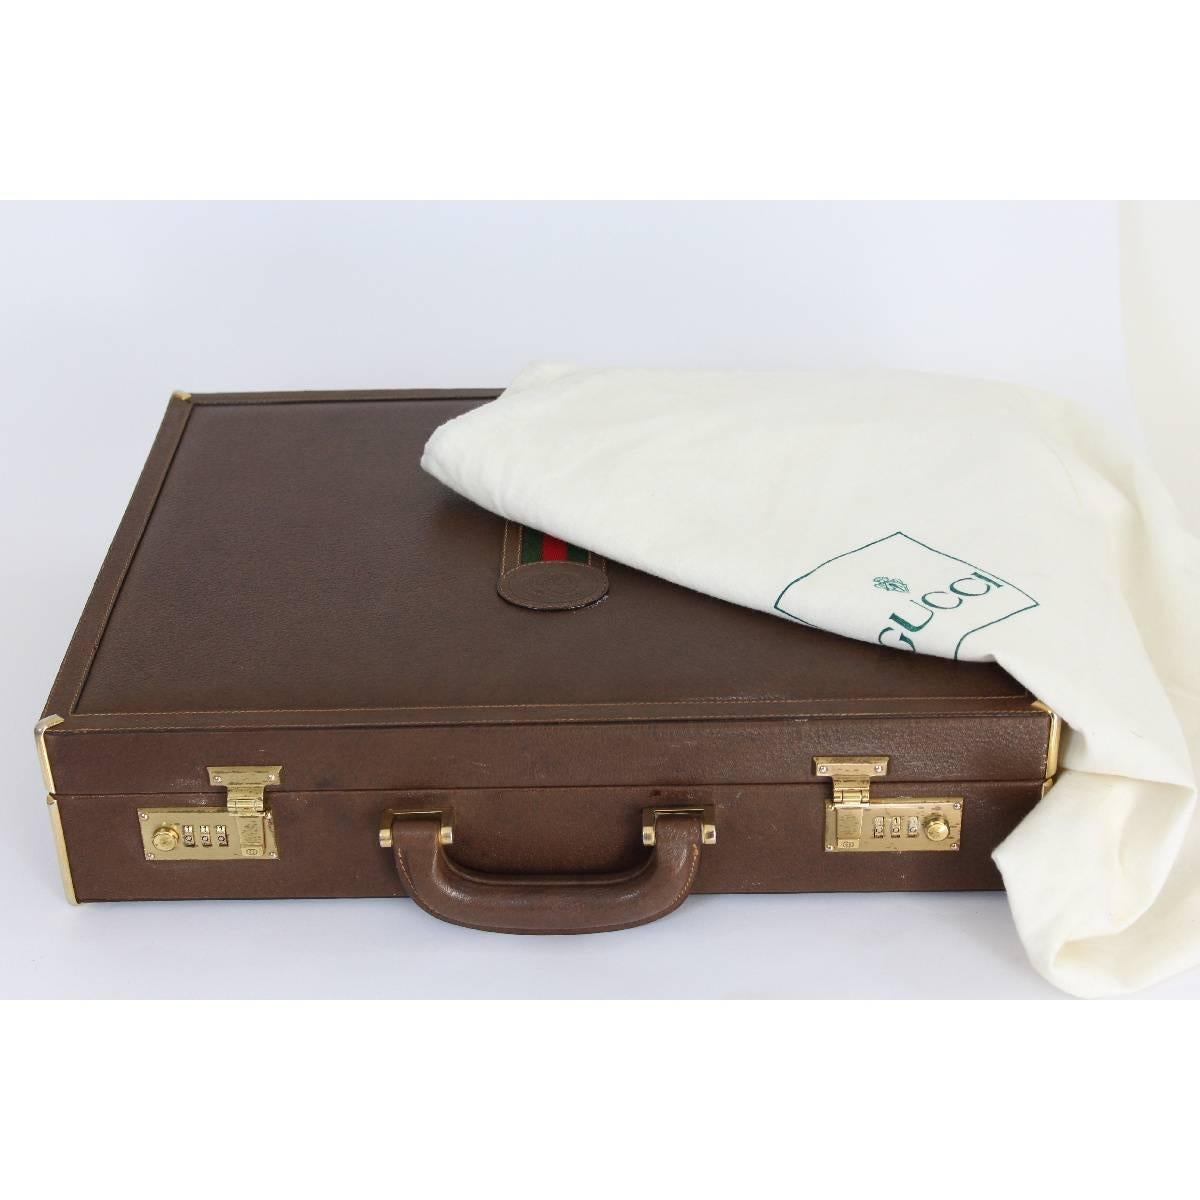 Gucci briefcase in brown leather with golden brass profiles. The two closures are working with secret code. Produced in the 70s. In excellent vintage condition. Inside there are several leather compartments, for documents and pens. The internal and